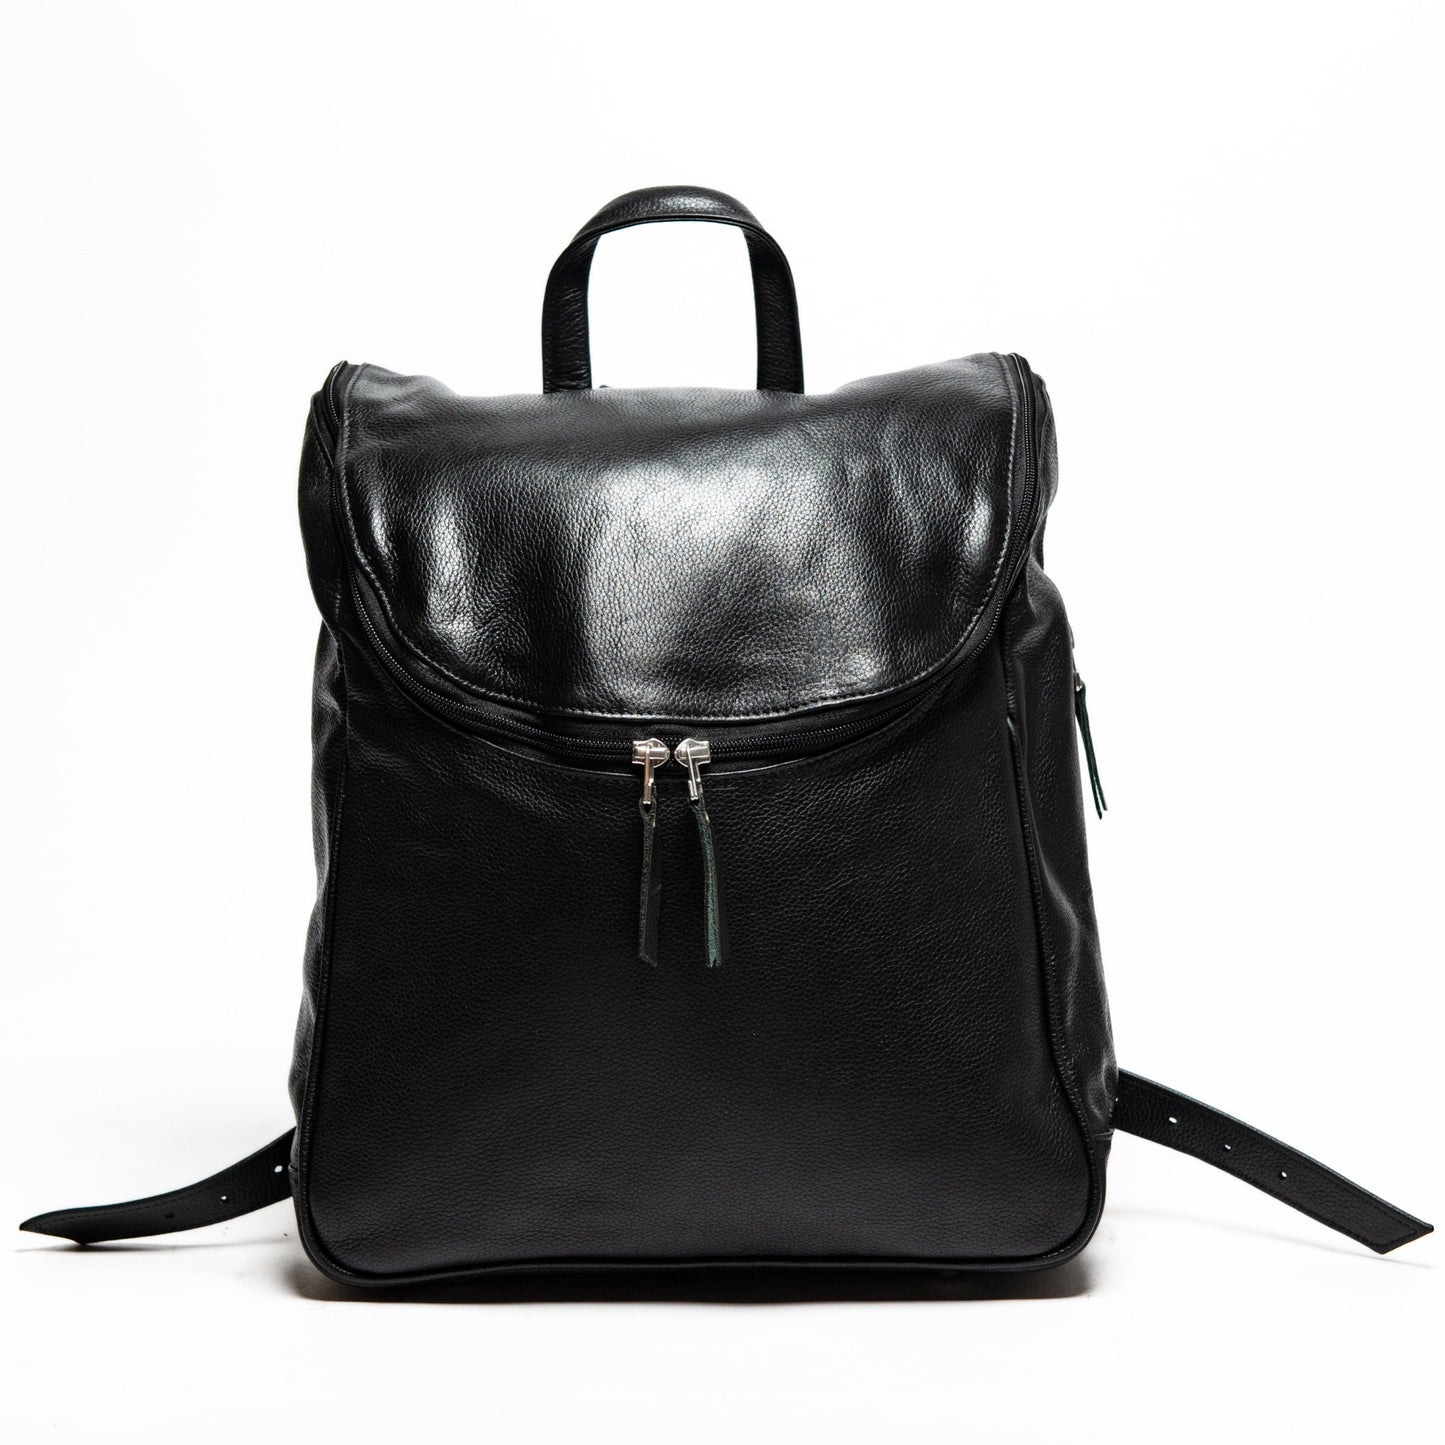 Student Leather Backpack - Black